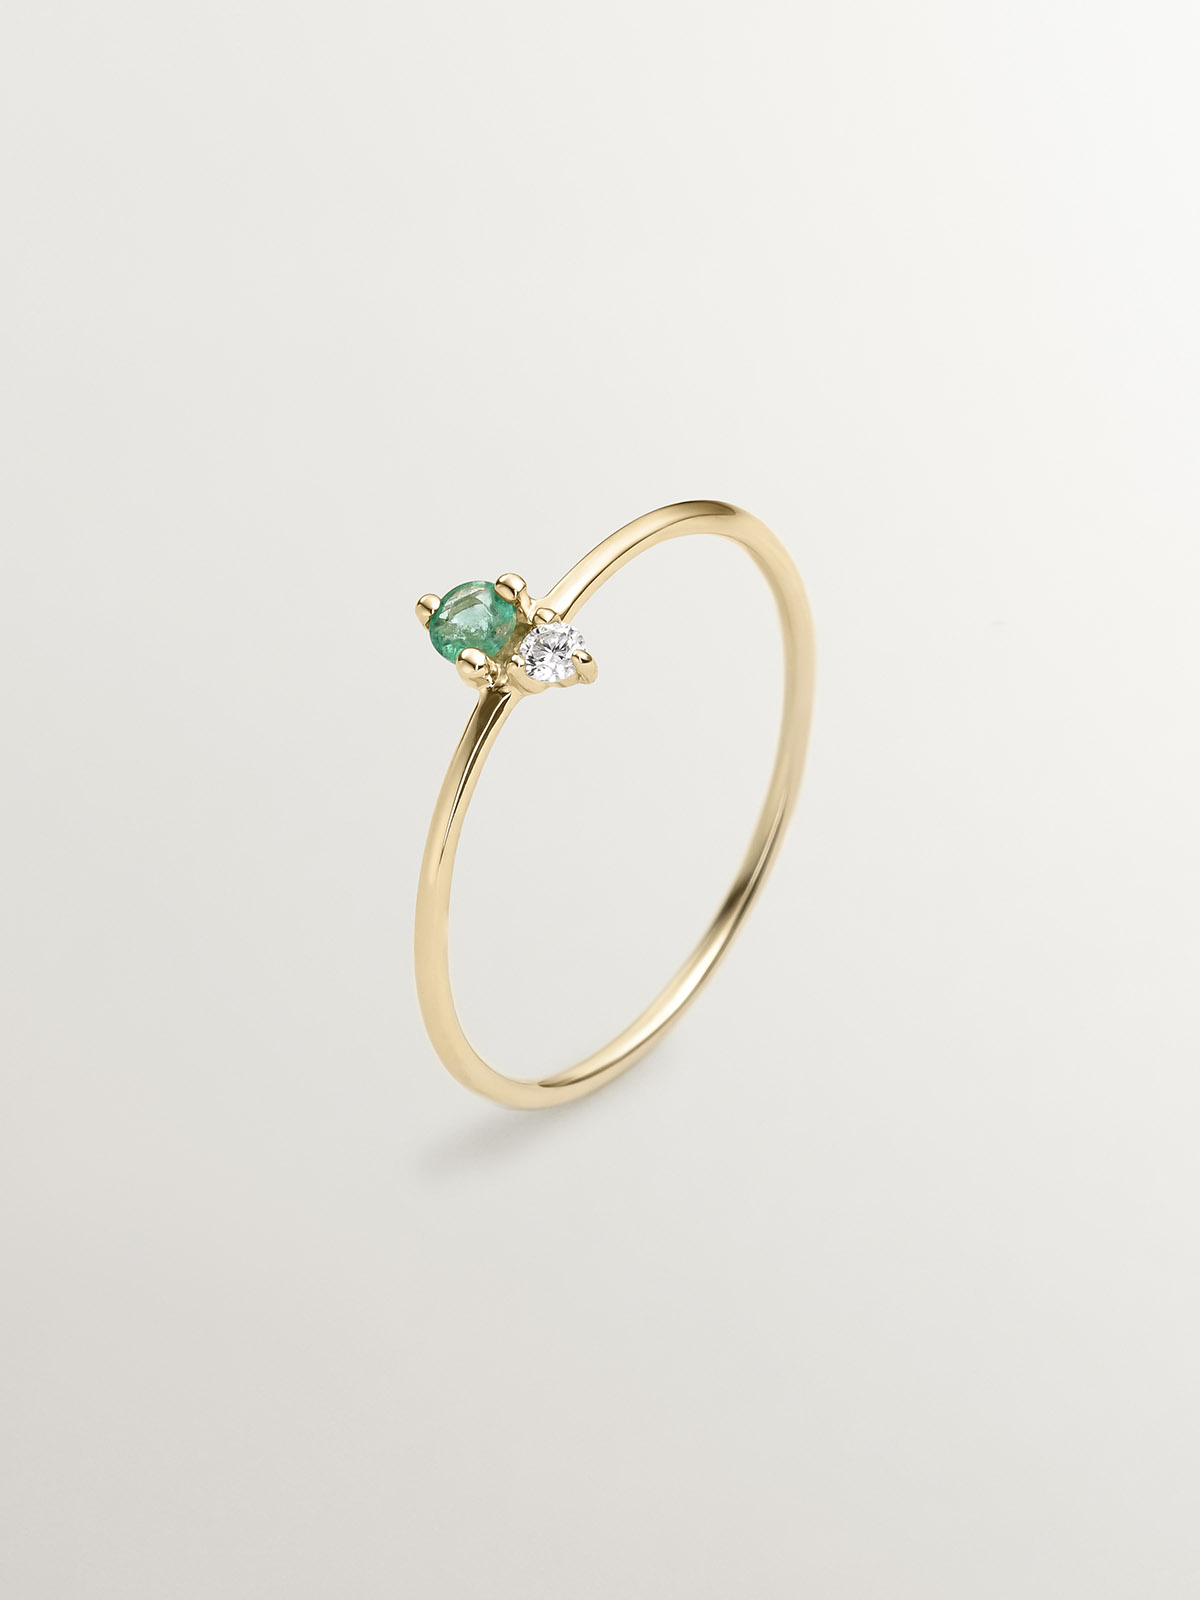 9K Yellow Gold Ring with Emerald and Diamond